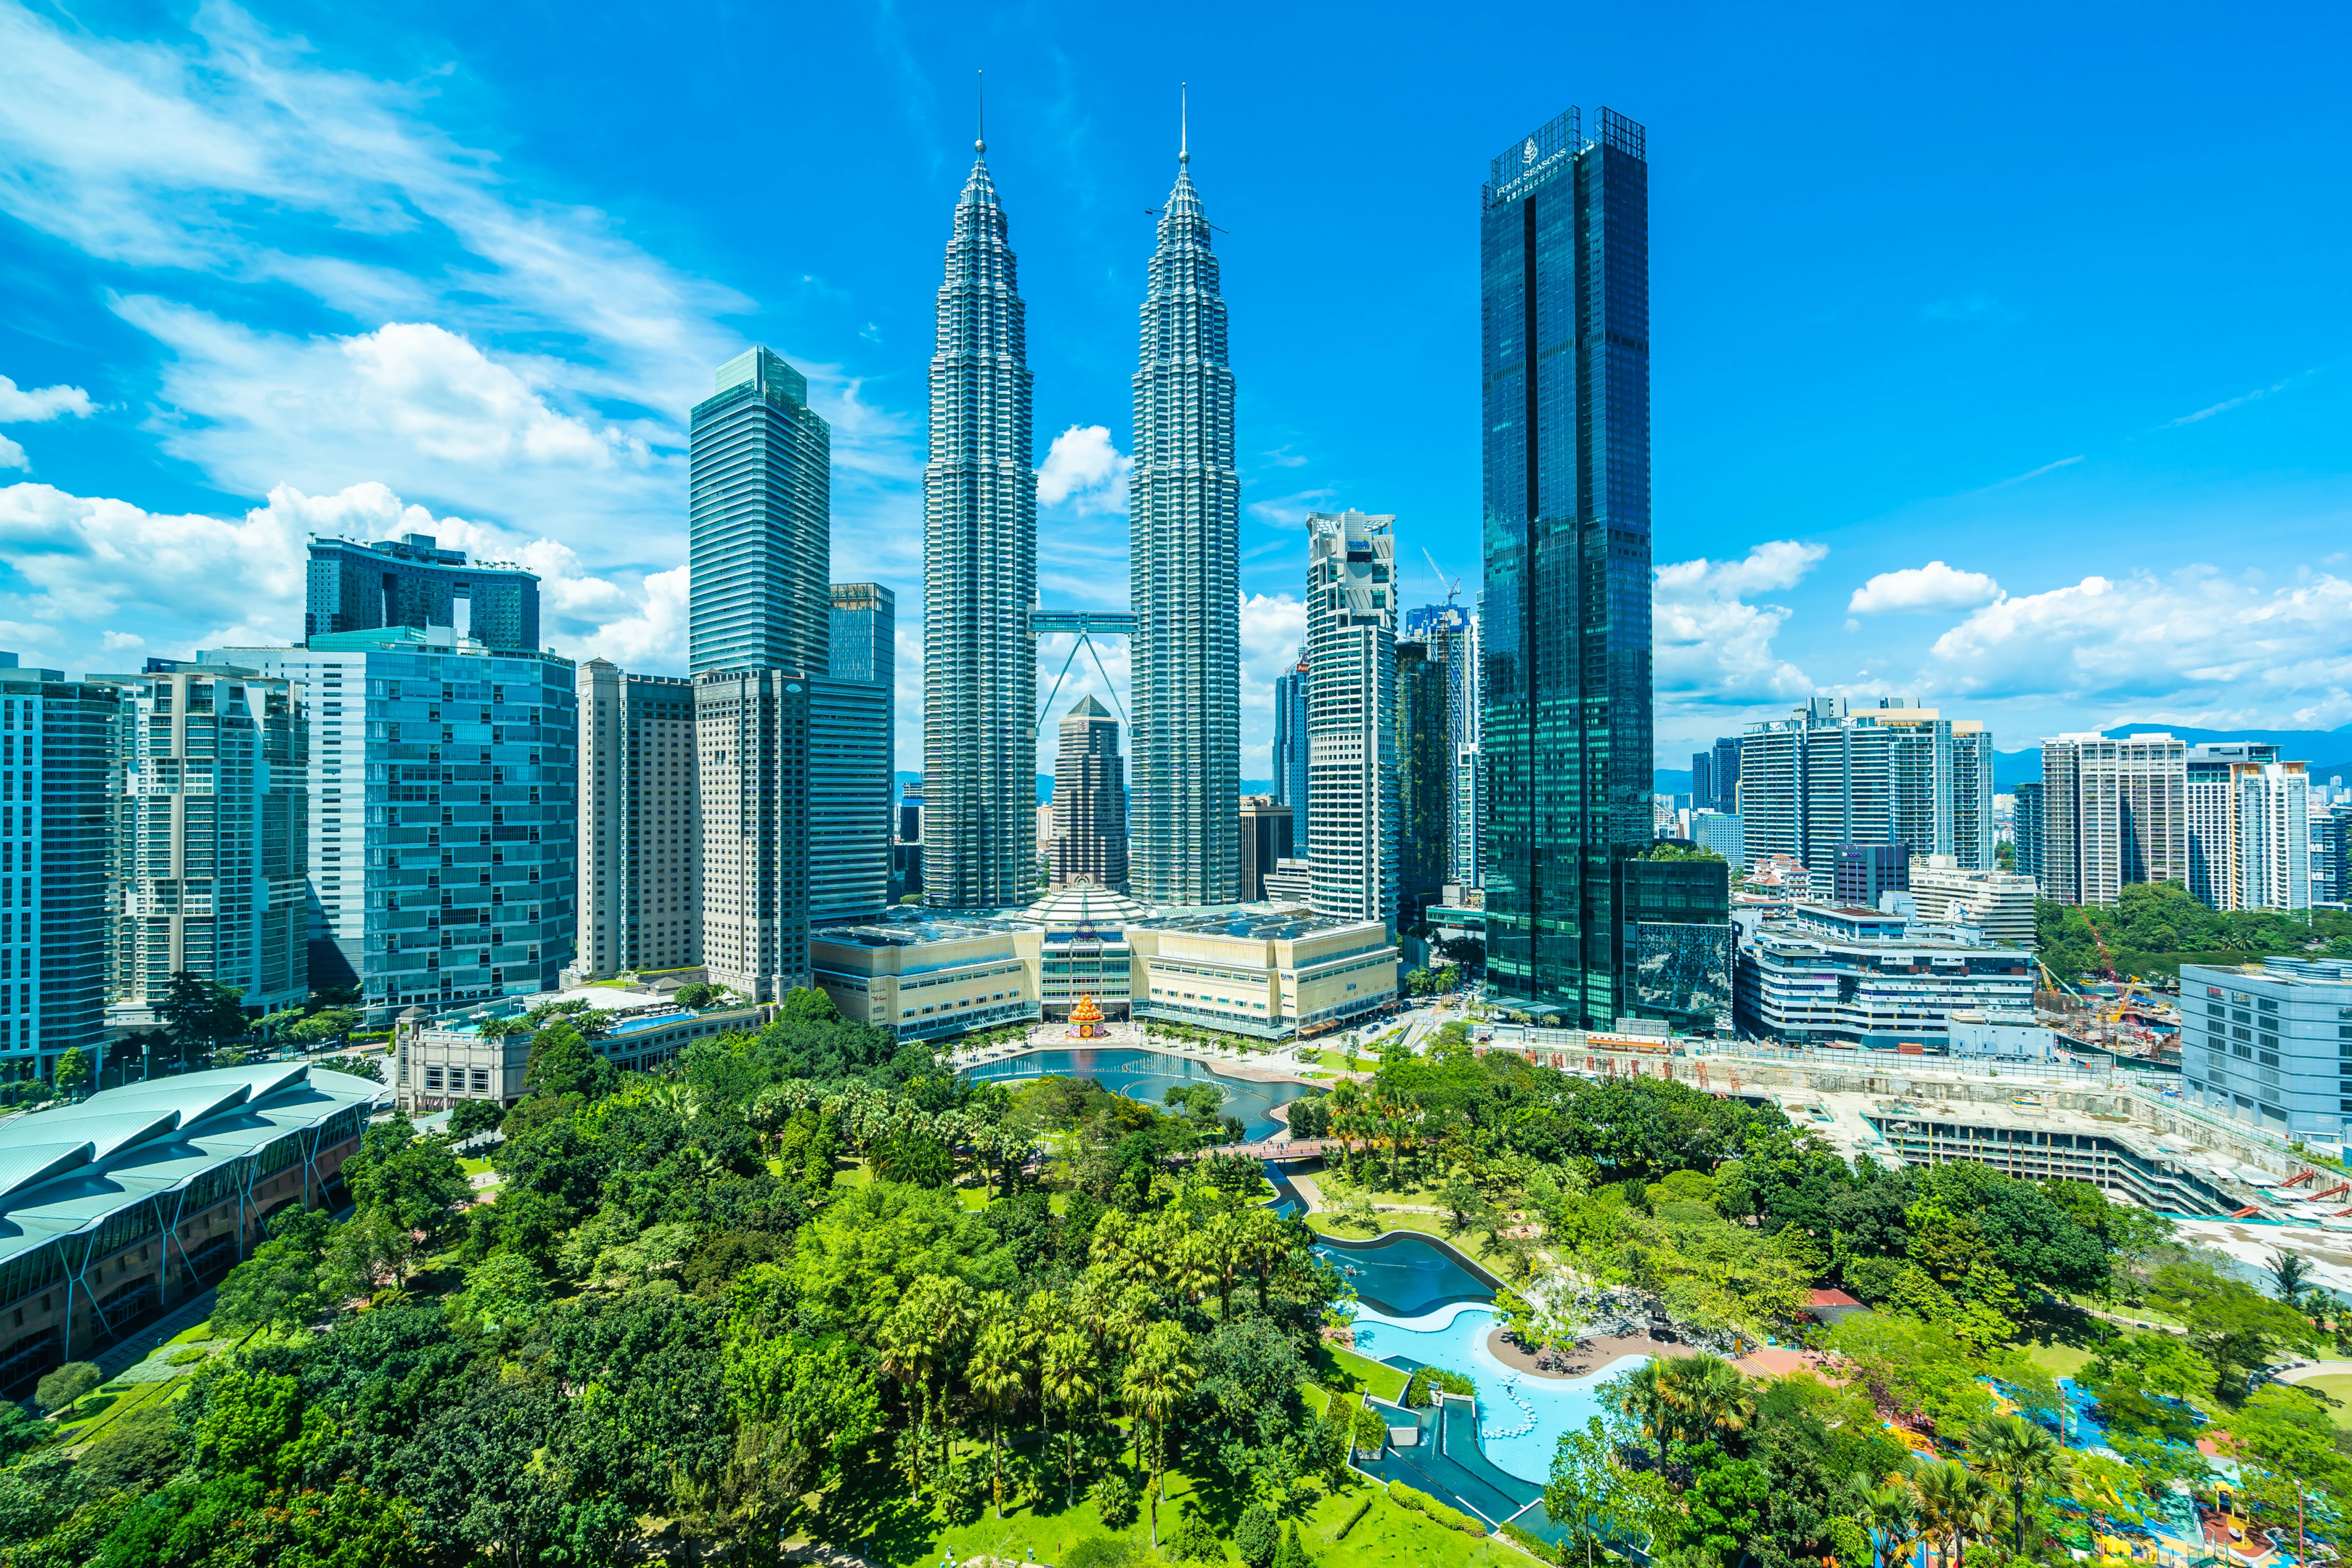 Places to Visit in KL for Free - KLCC Park